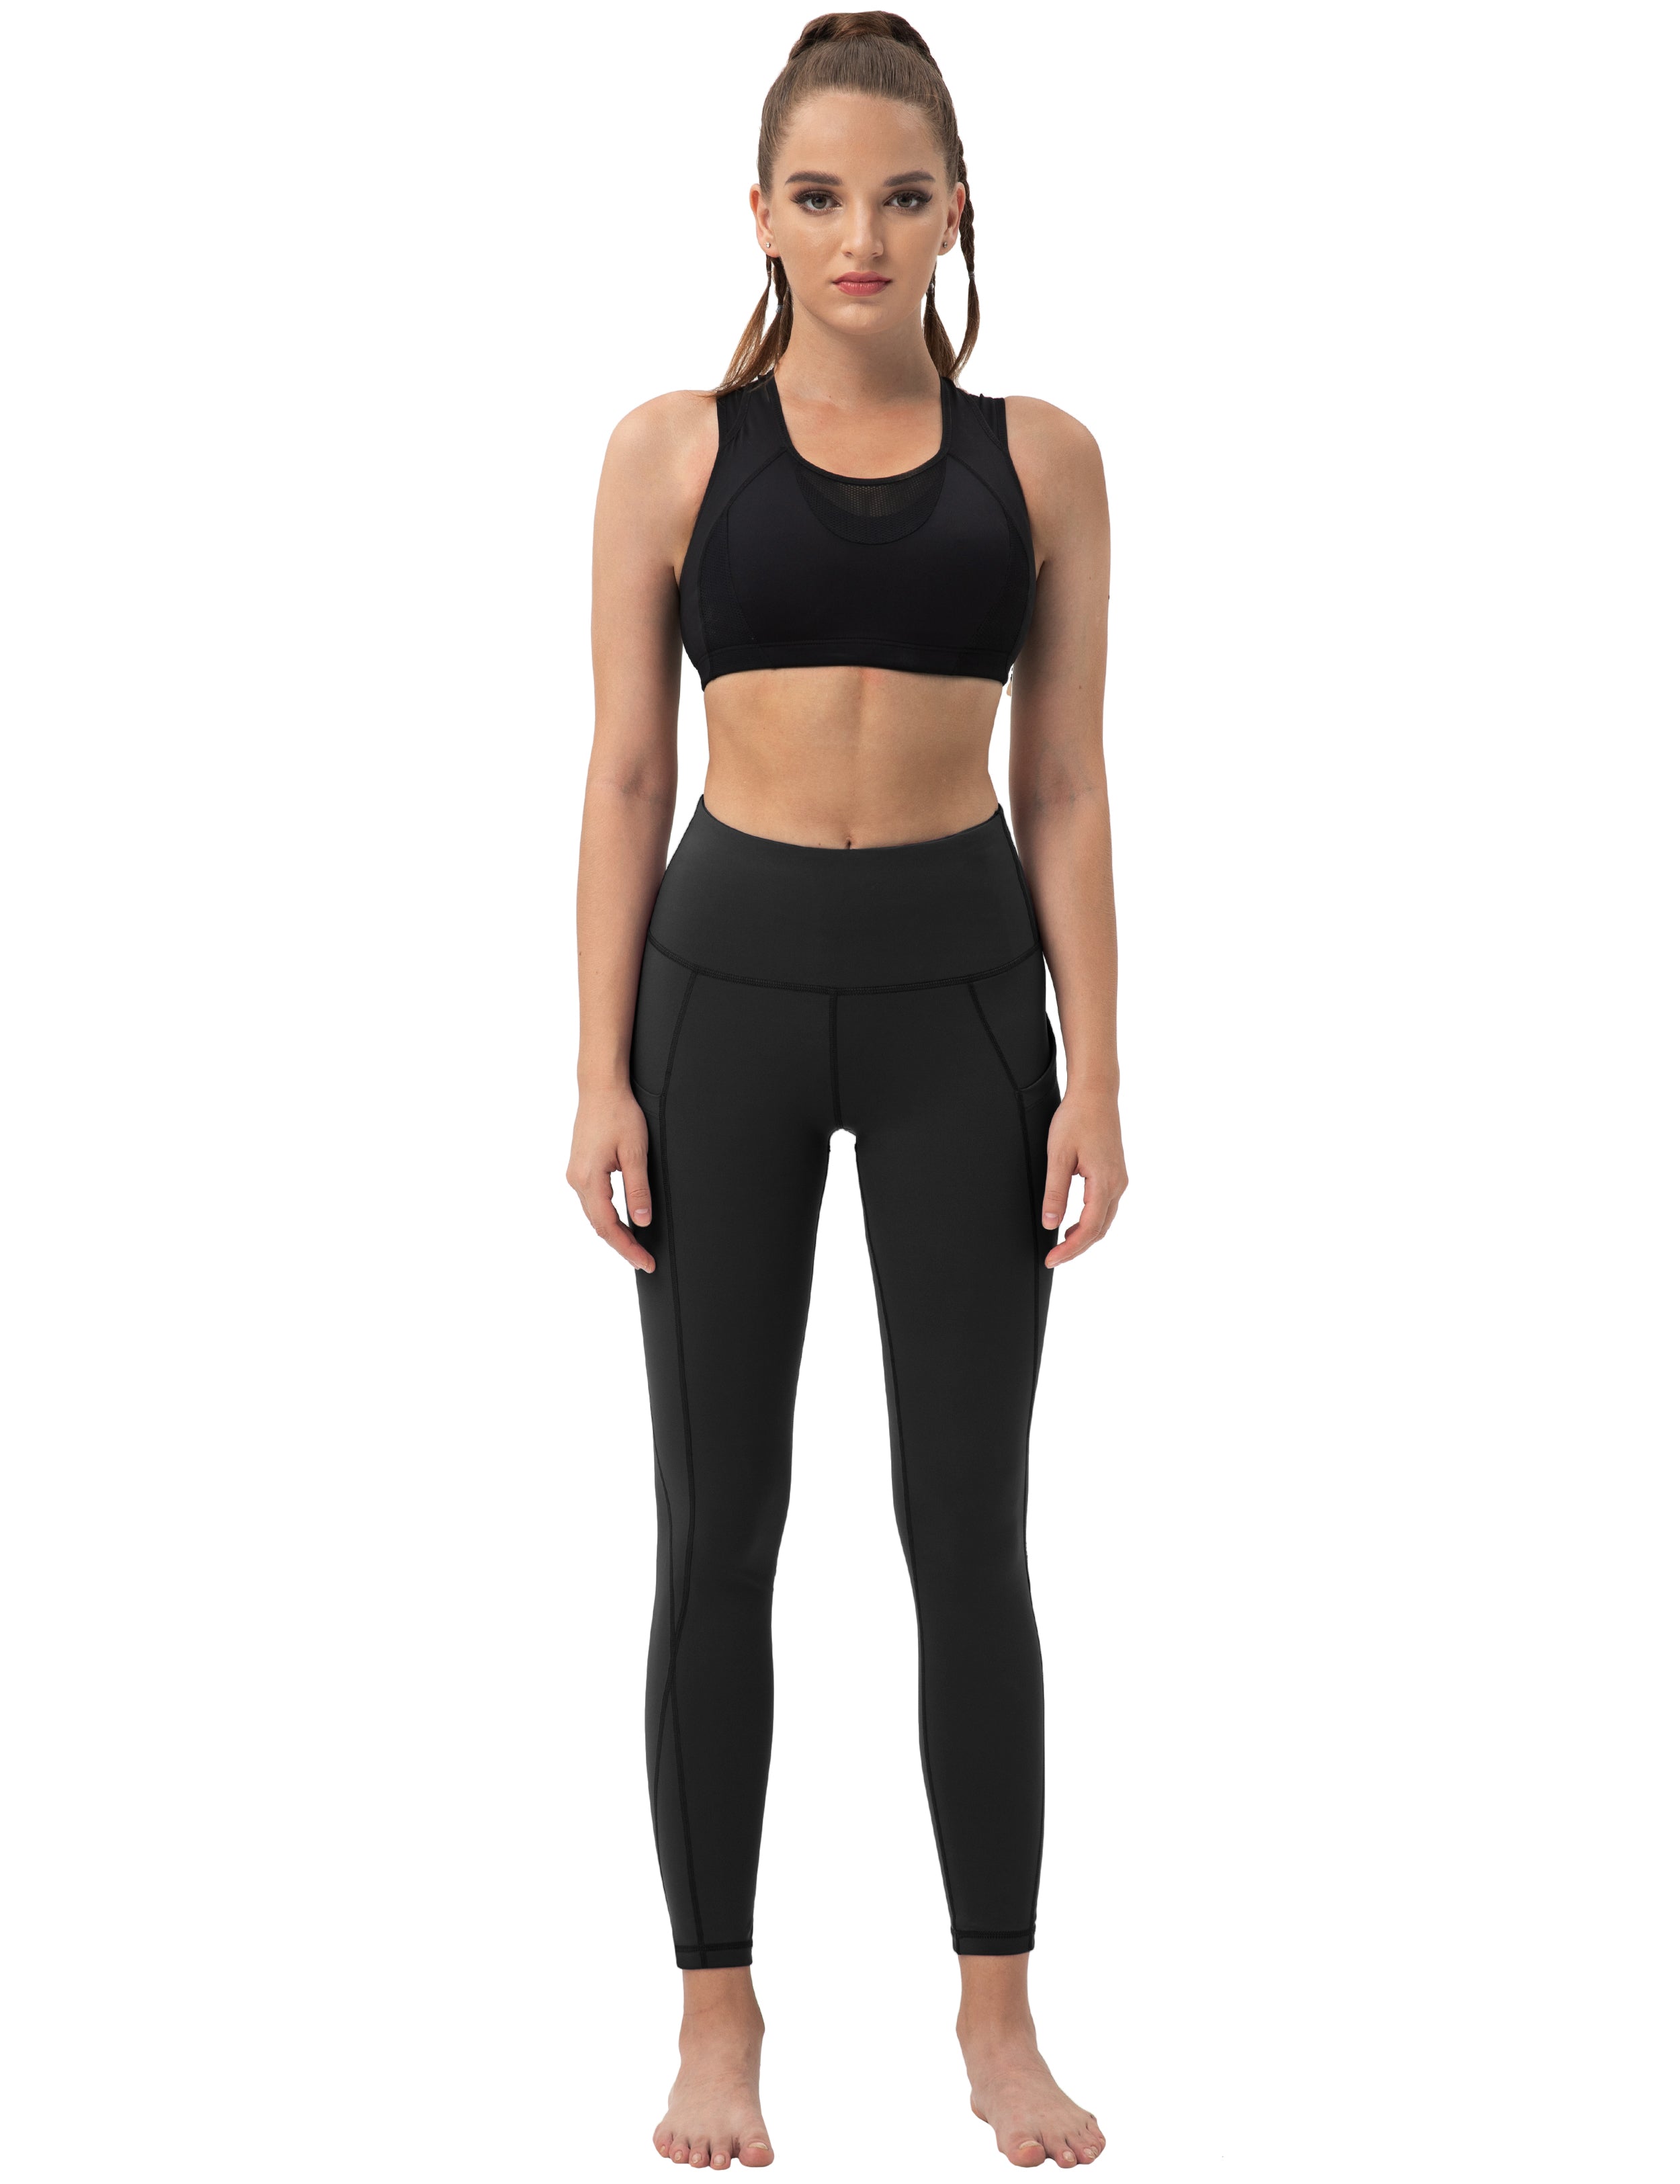 High Waist Side Pockets Yoga Pants black 75% Nylon, 25% Spandex Fabric doesn't attract lint easily 4-way stretch No see-through Moisture-wicking Tummy control Inner pocket